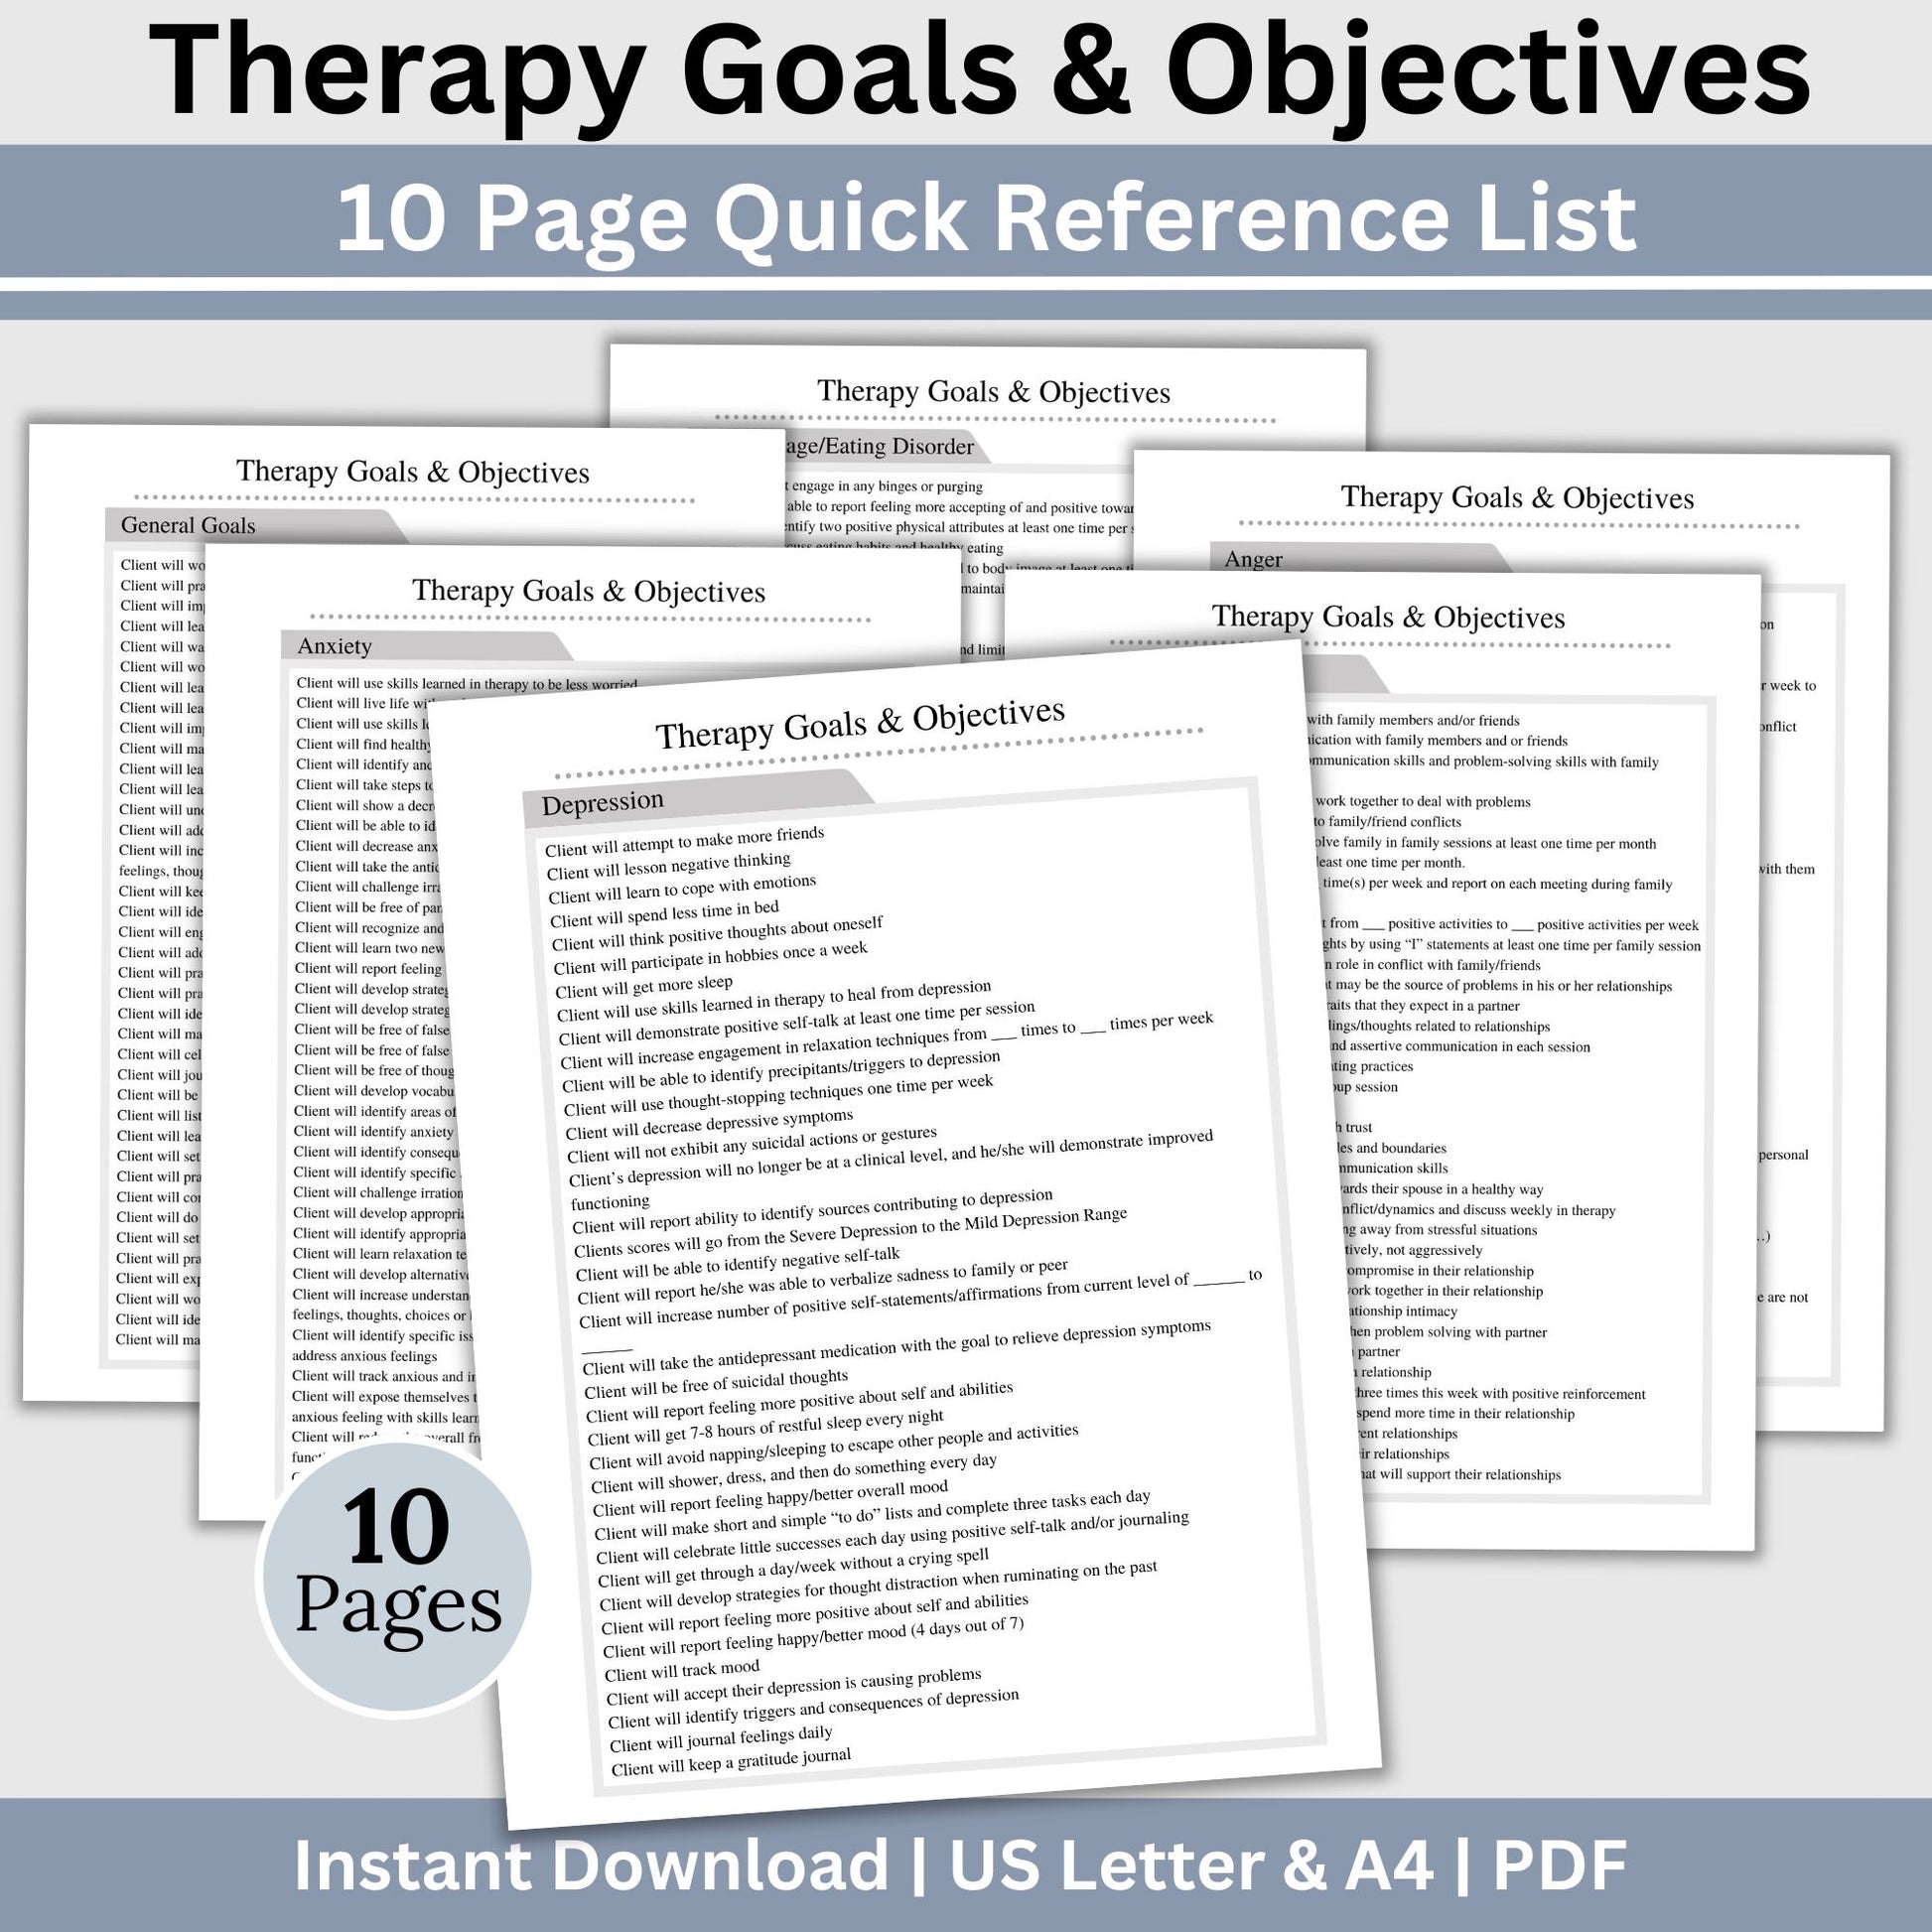 Therapist tool for productive goal and objective setting for your clients. Use this template as a reference point for creating your own client goals or cut and past right into your treatment plan.